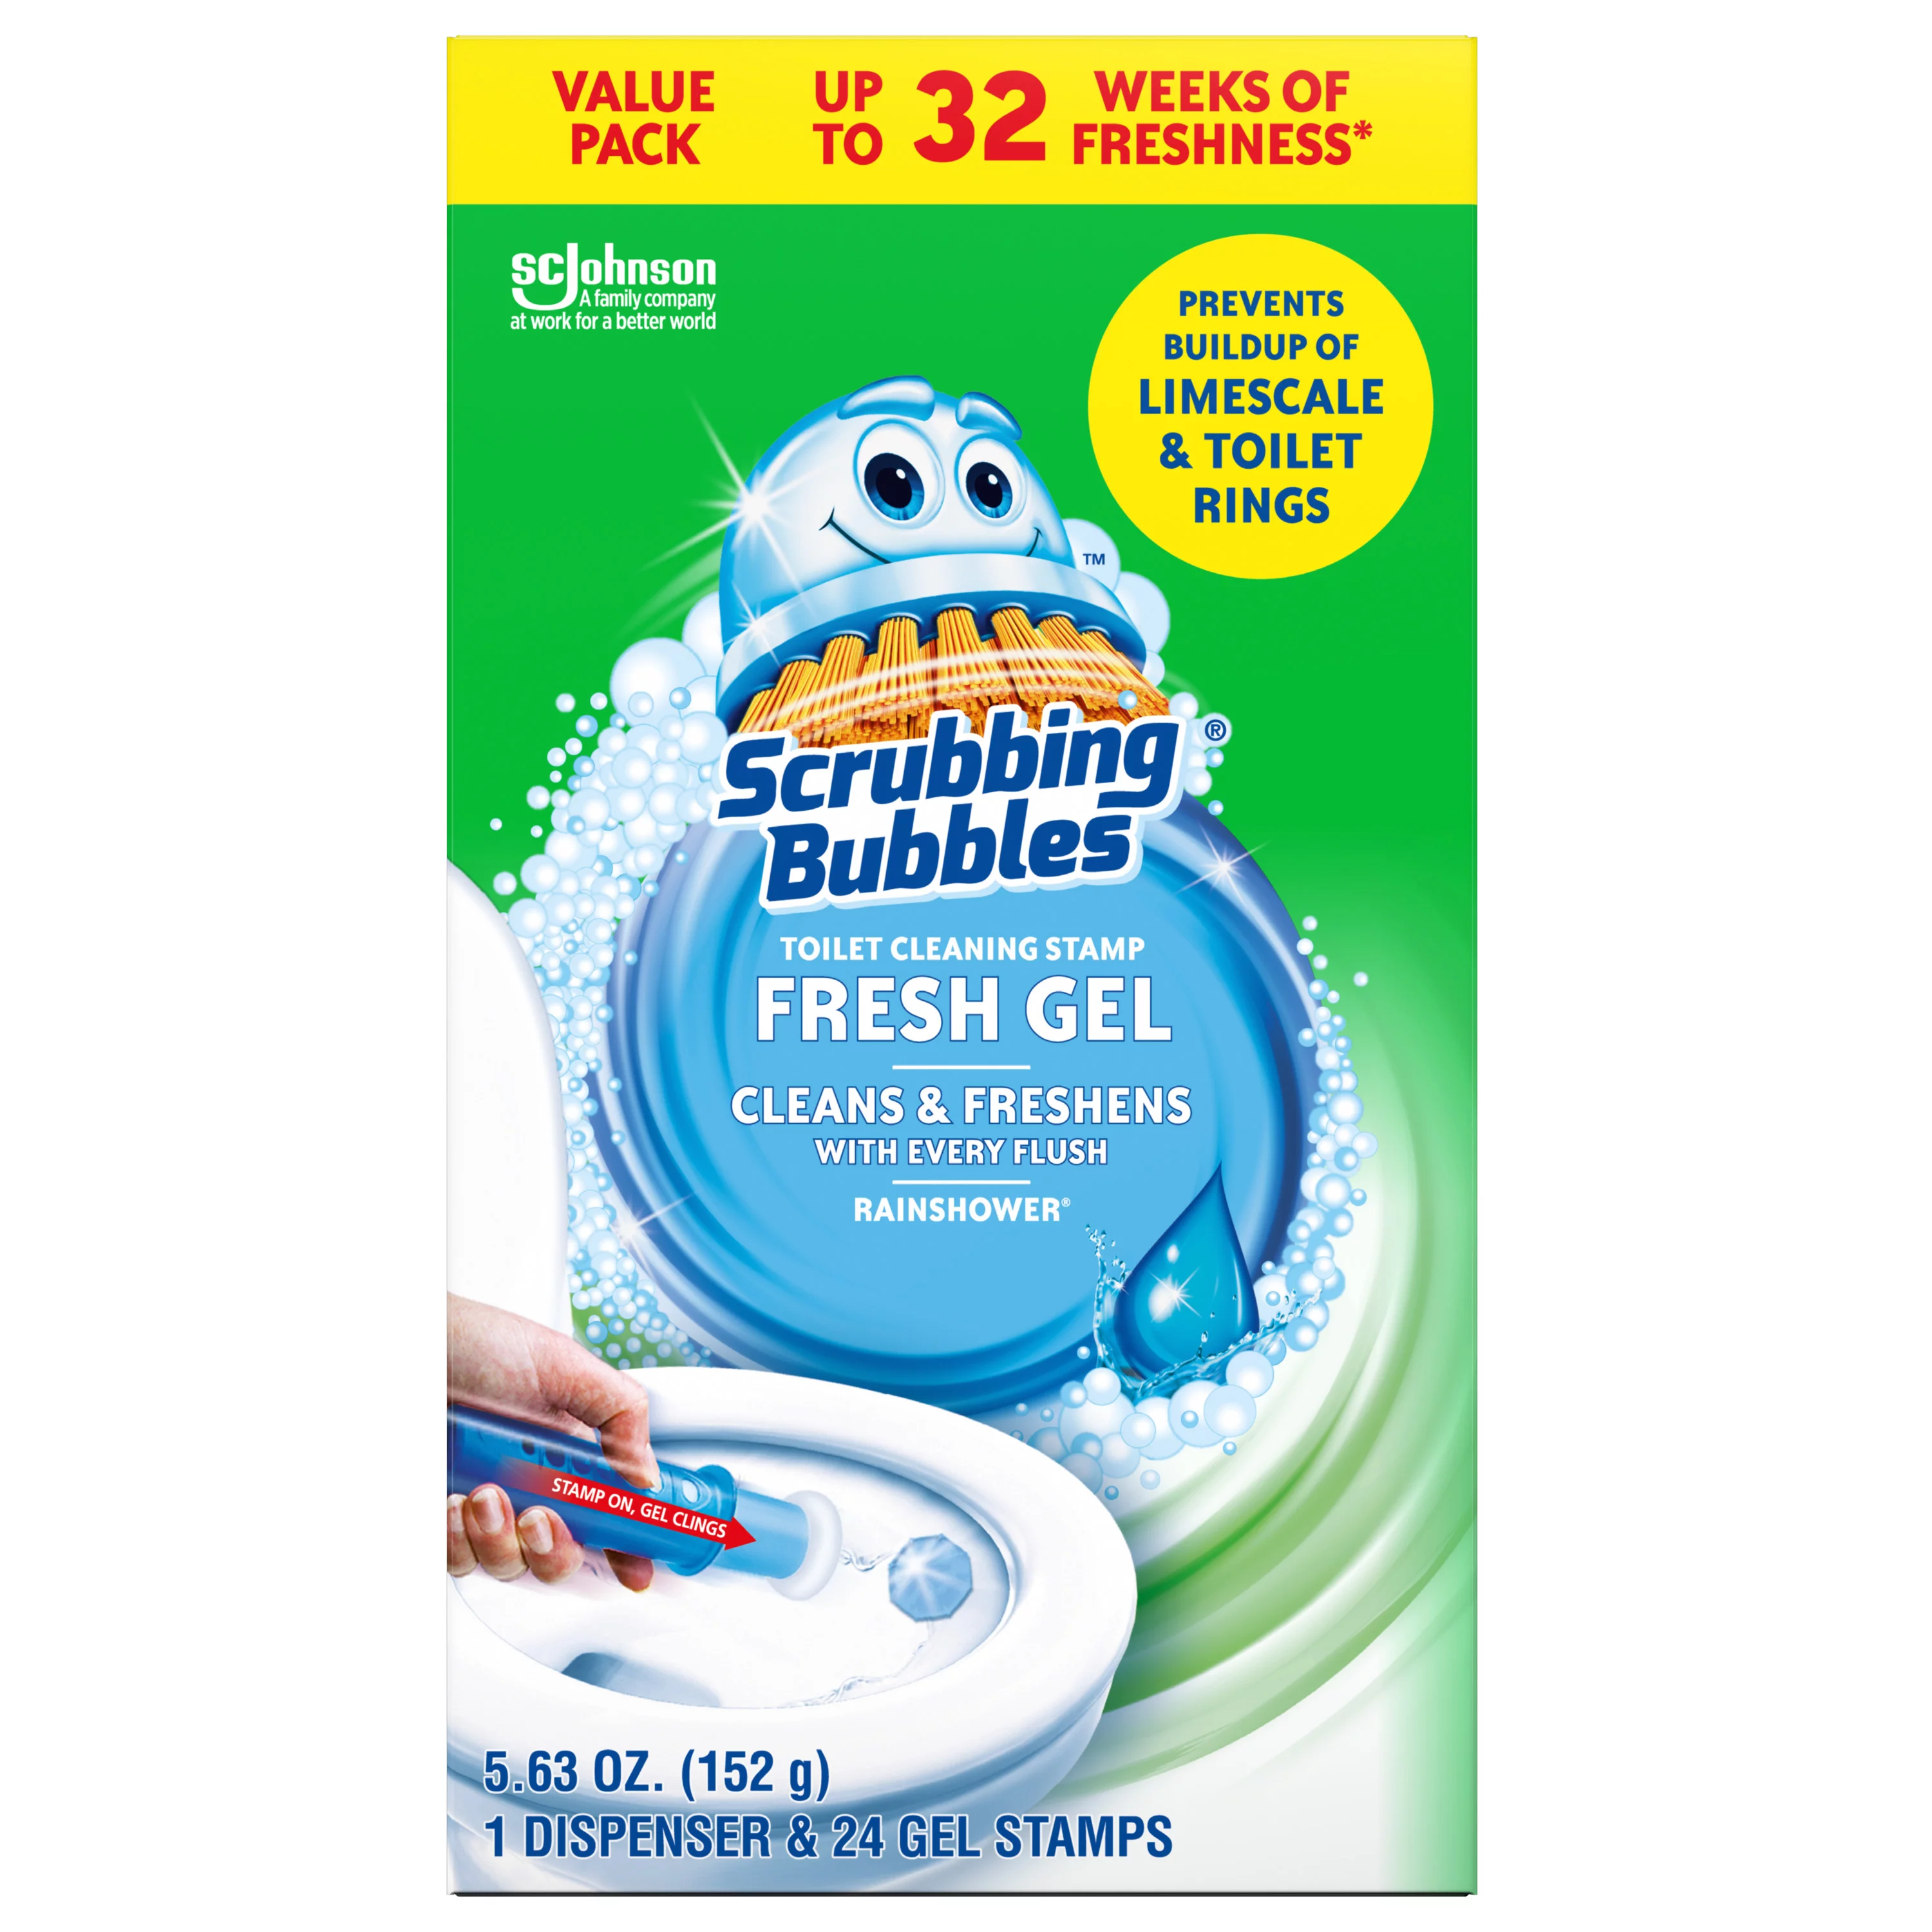 Scrubbing Bubbles Fresh Gel Toilet Cleaning Stamp, Rain shower, Dispenser with 4 Refills